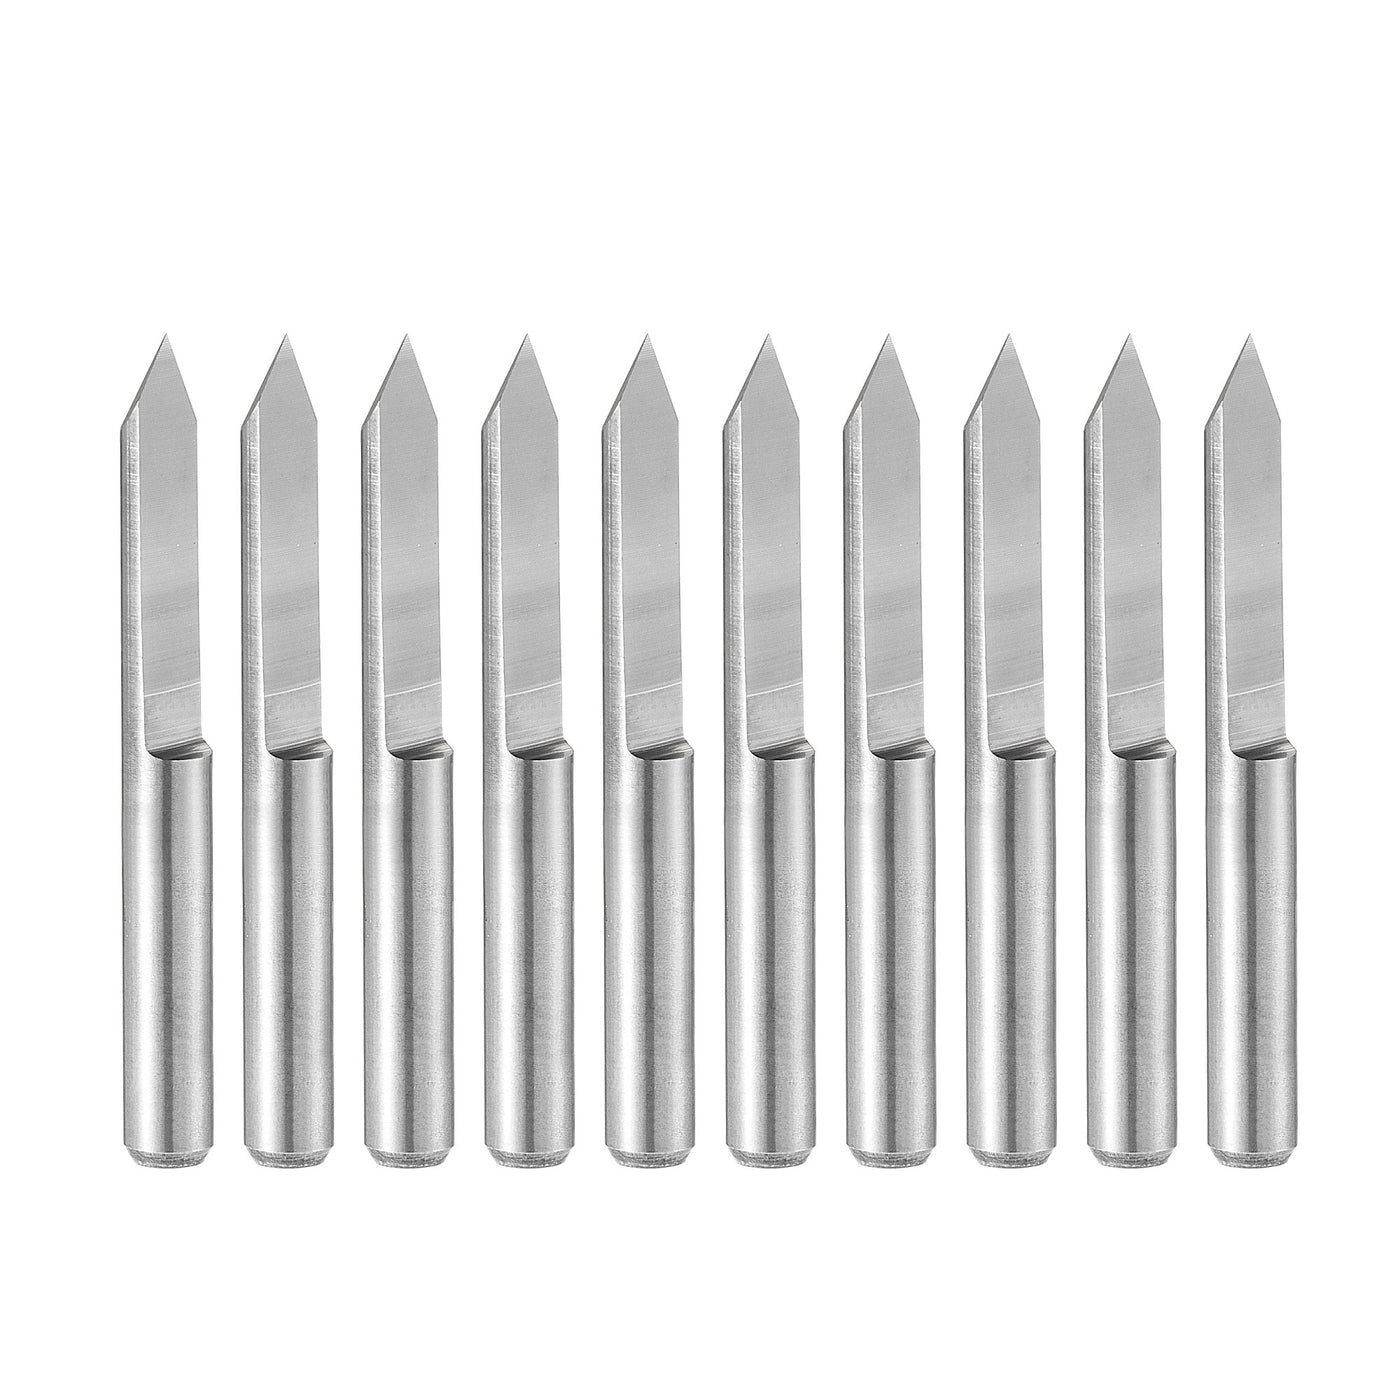 uxcell Uxcell 1/8" Shank 0.2mm Tip 60 Degree Carbide Wood Engraving Bit CNC Router Tool 10pcs